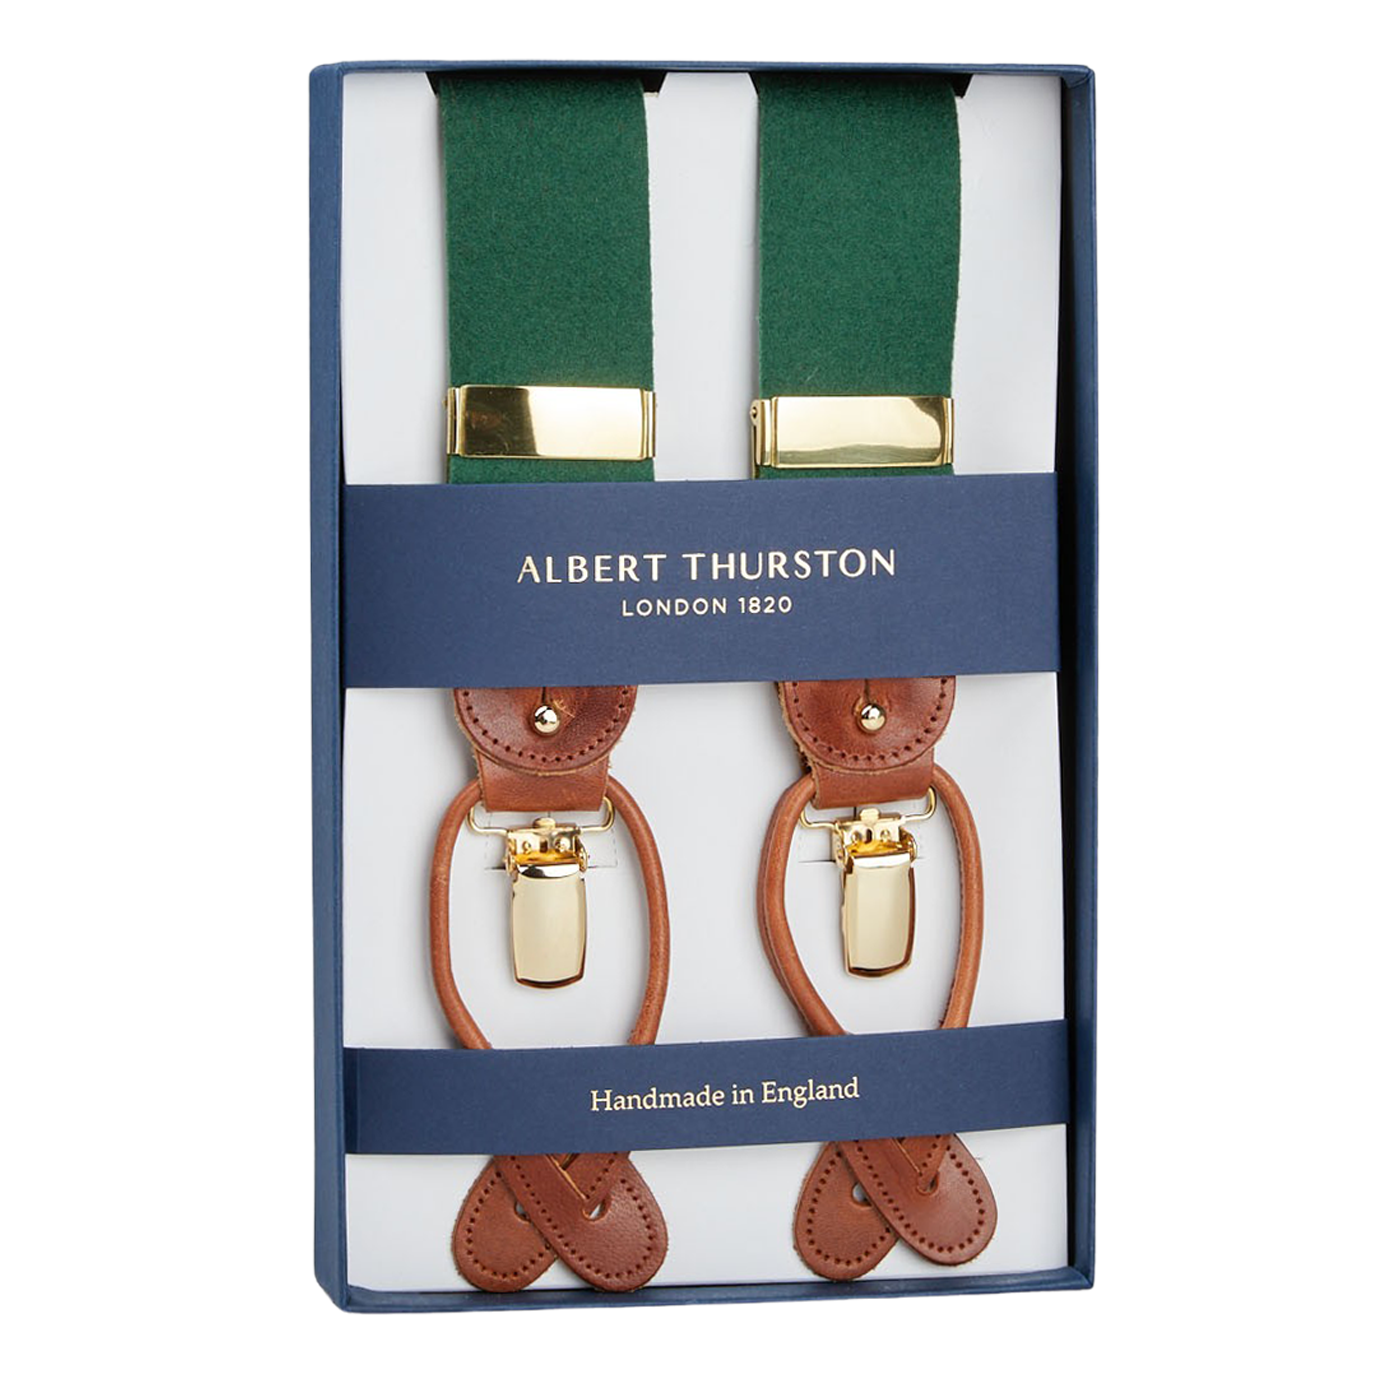 Albert Thurston Green Wool Boxcloth 35mm Braces, featuring brown leather details and handmade craftsmanship.